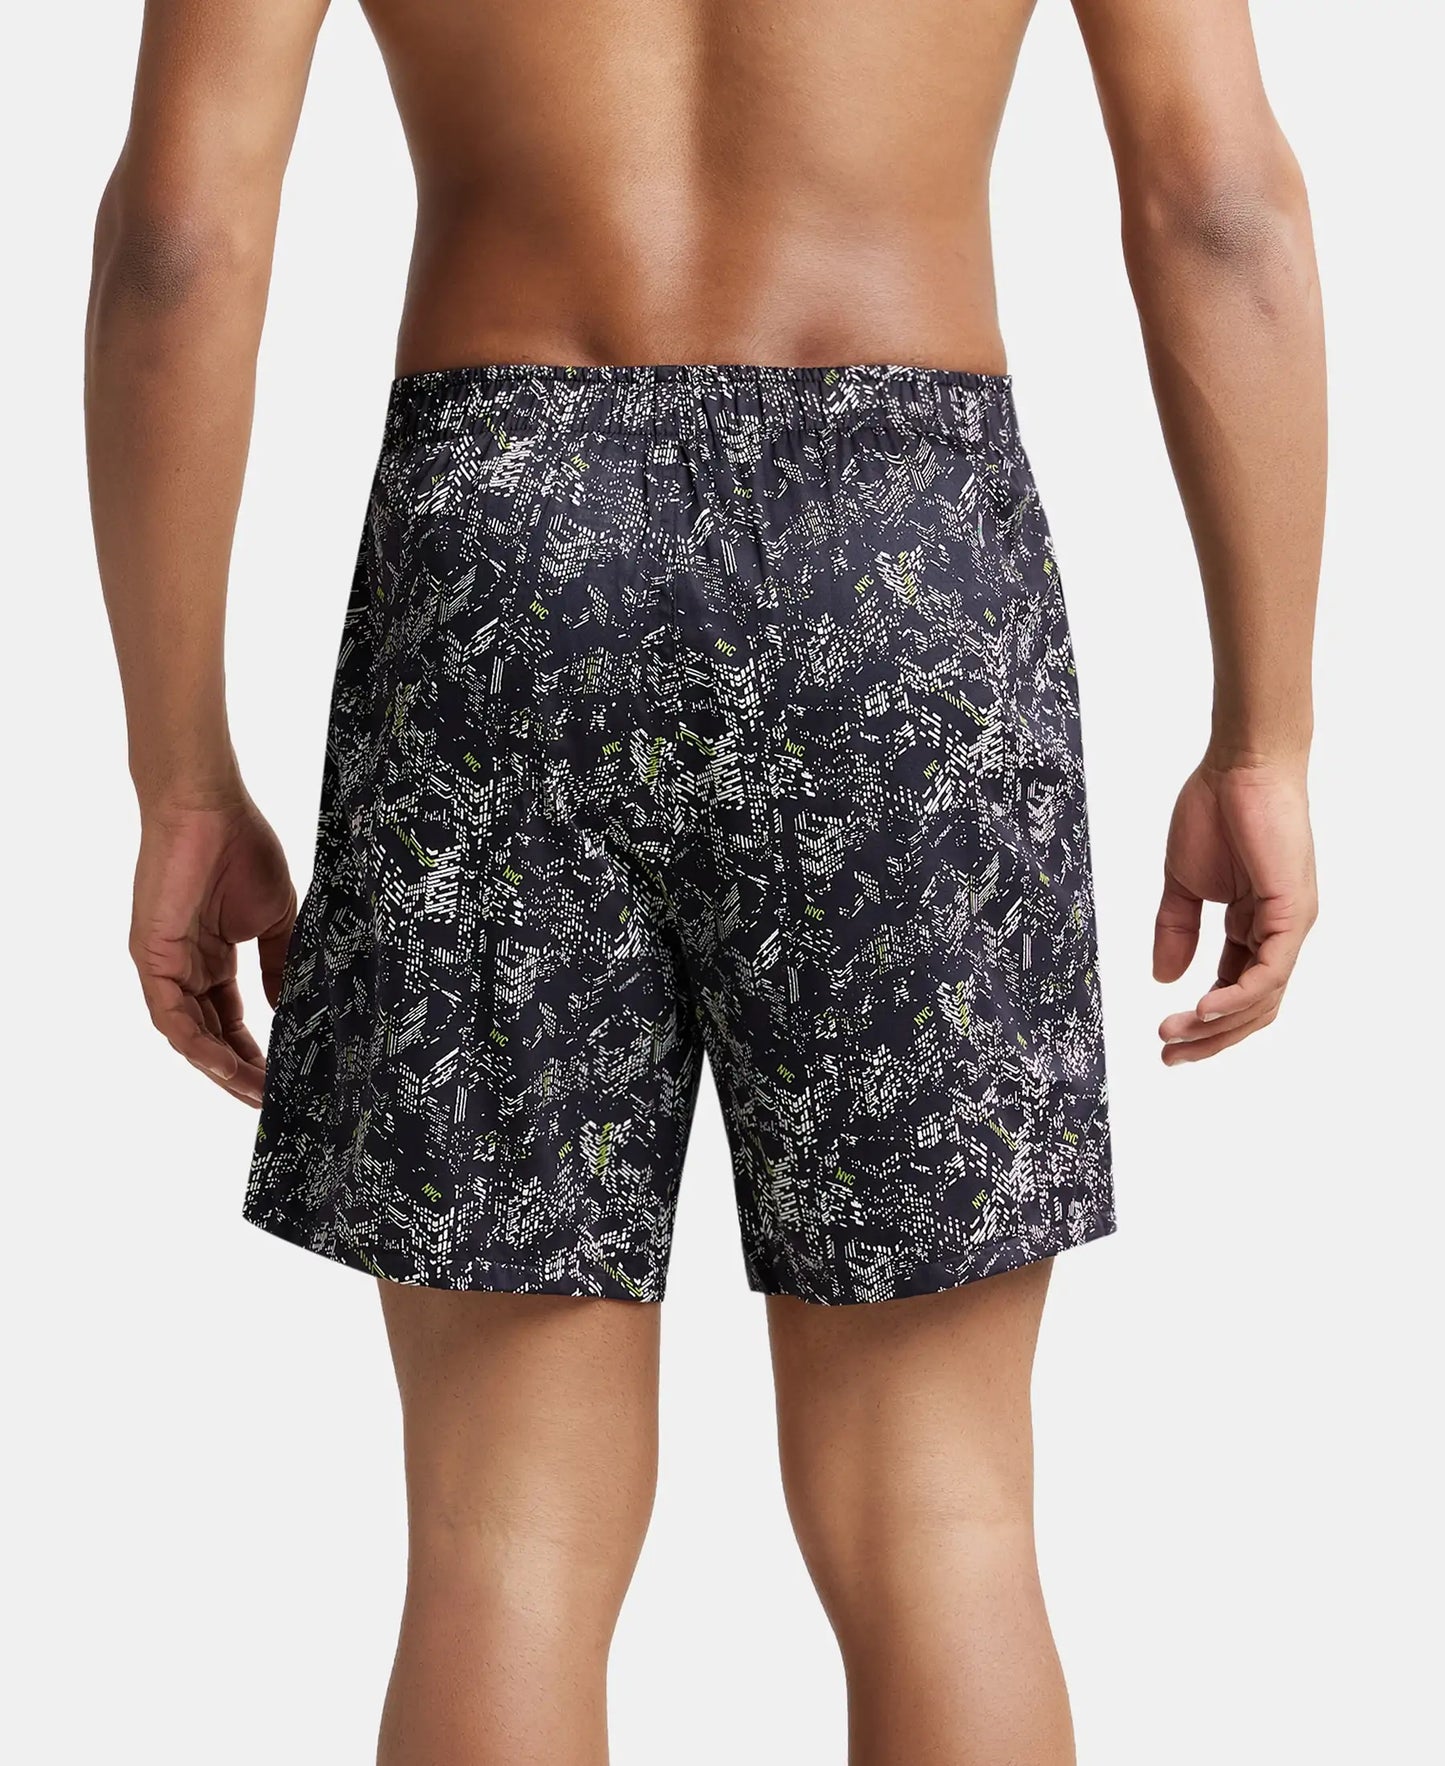 Super Combed Cotton Satin Weave Printed Boxer Shorts with Side Pocket - Black-Building-3